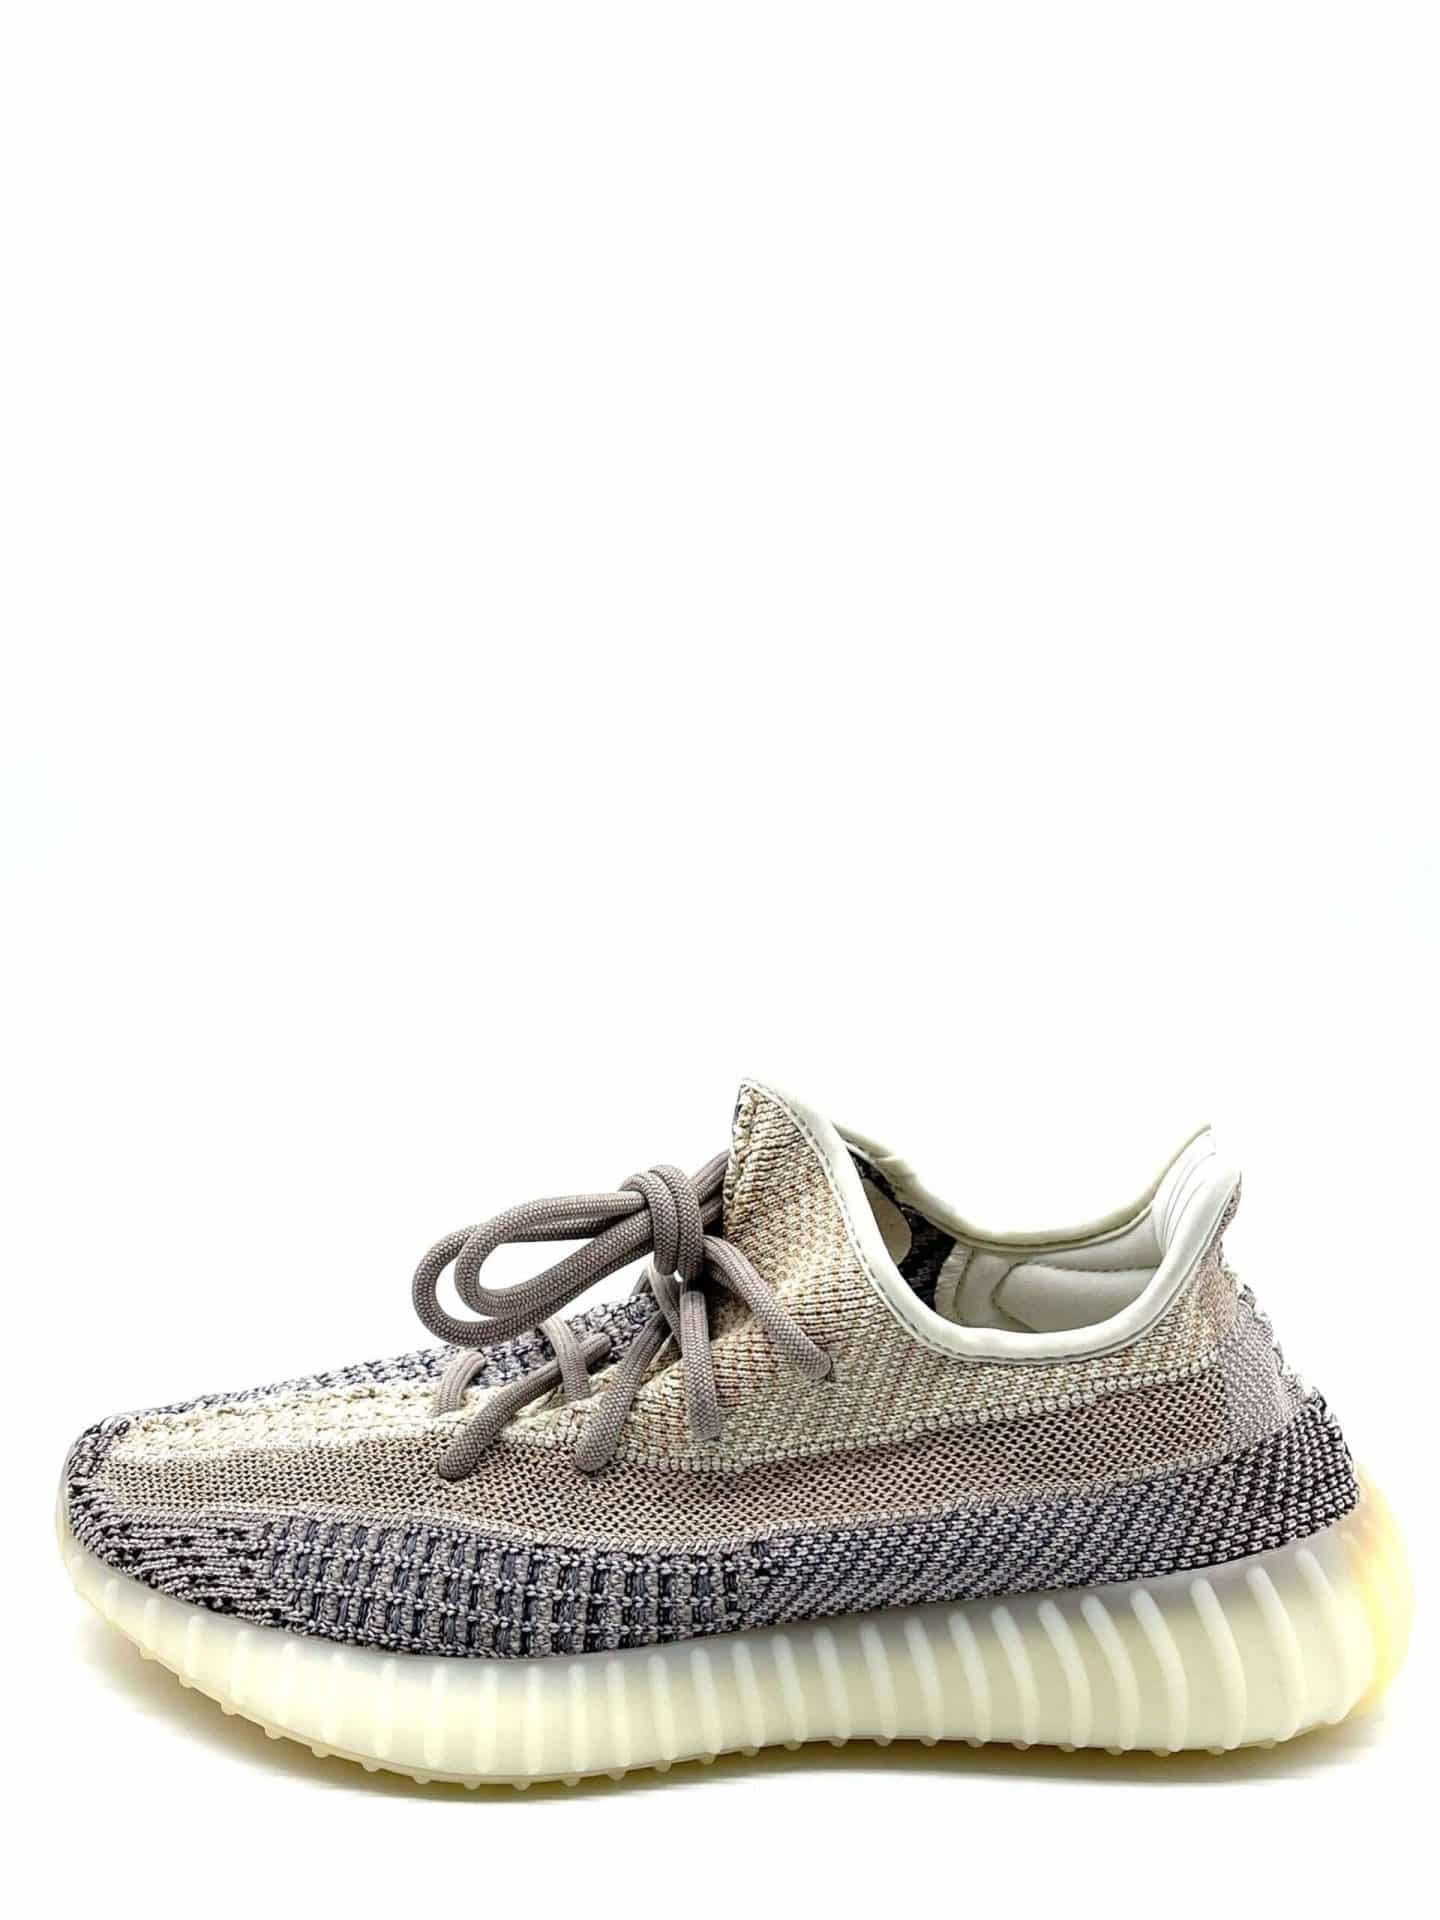 Cheap Yeezy 350 Boost V2Aposs Oreo Perfect Condition With Original Box And Packing